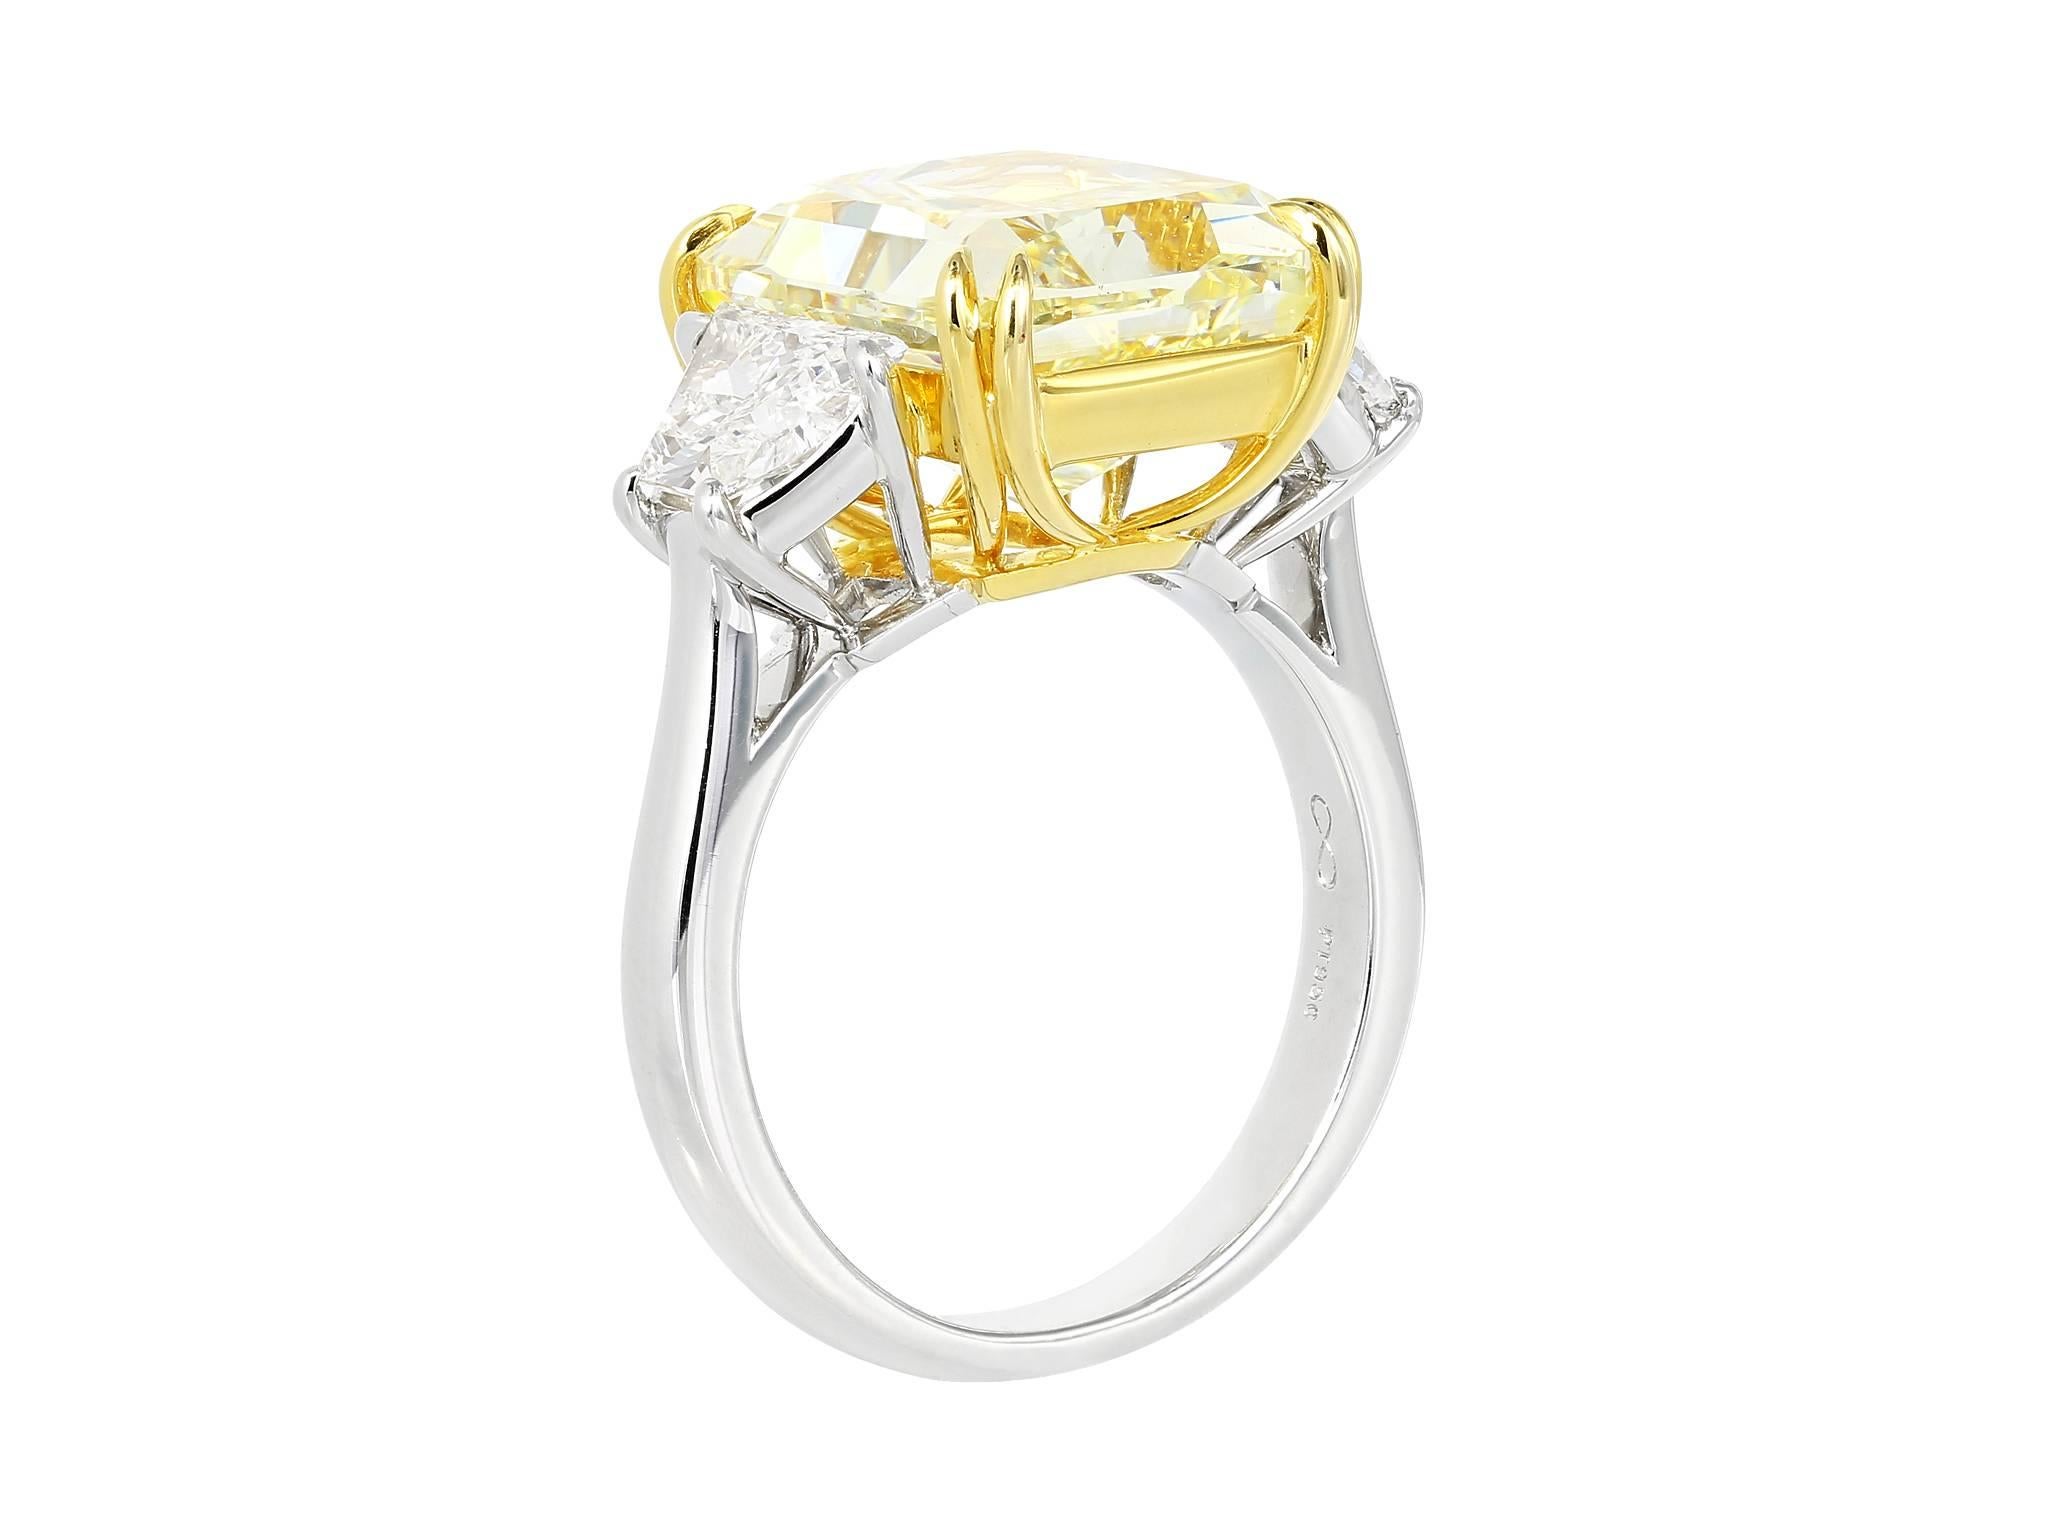 Platinum and 18 karat yellow gold three stone style engagement ring, featuring one cushion cut canary diamond, weighing 7.18 carats, measuring 11.30 x 10.03 x 6.79 mm, having a color and clarity of Fancy Yellow/VS1 with GIA report 2155309979 and